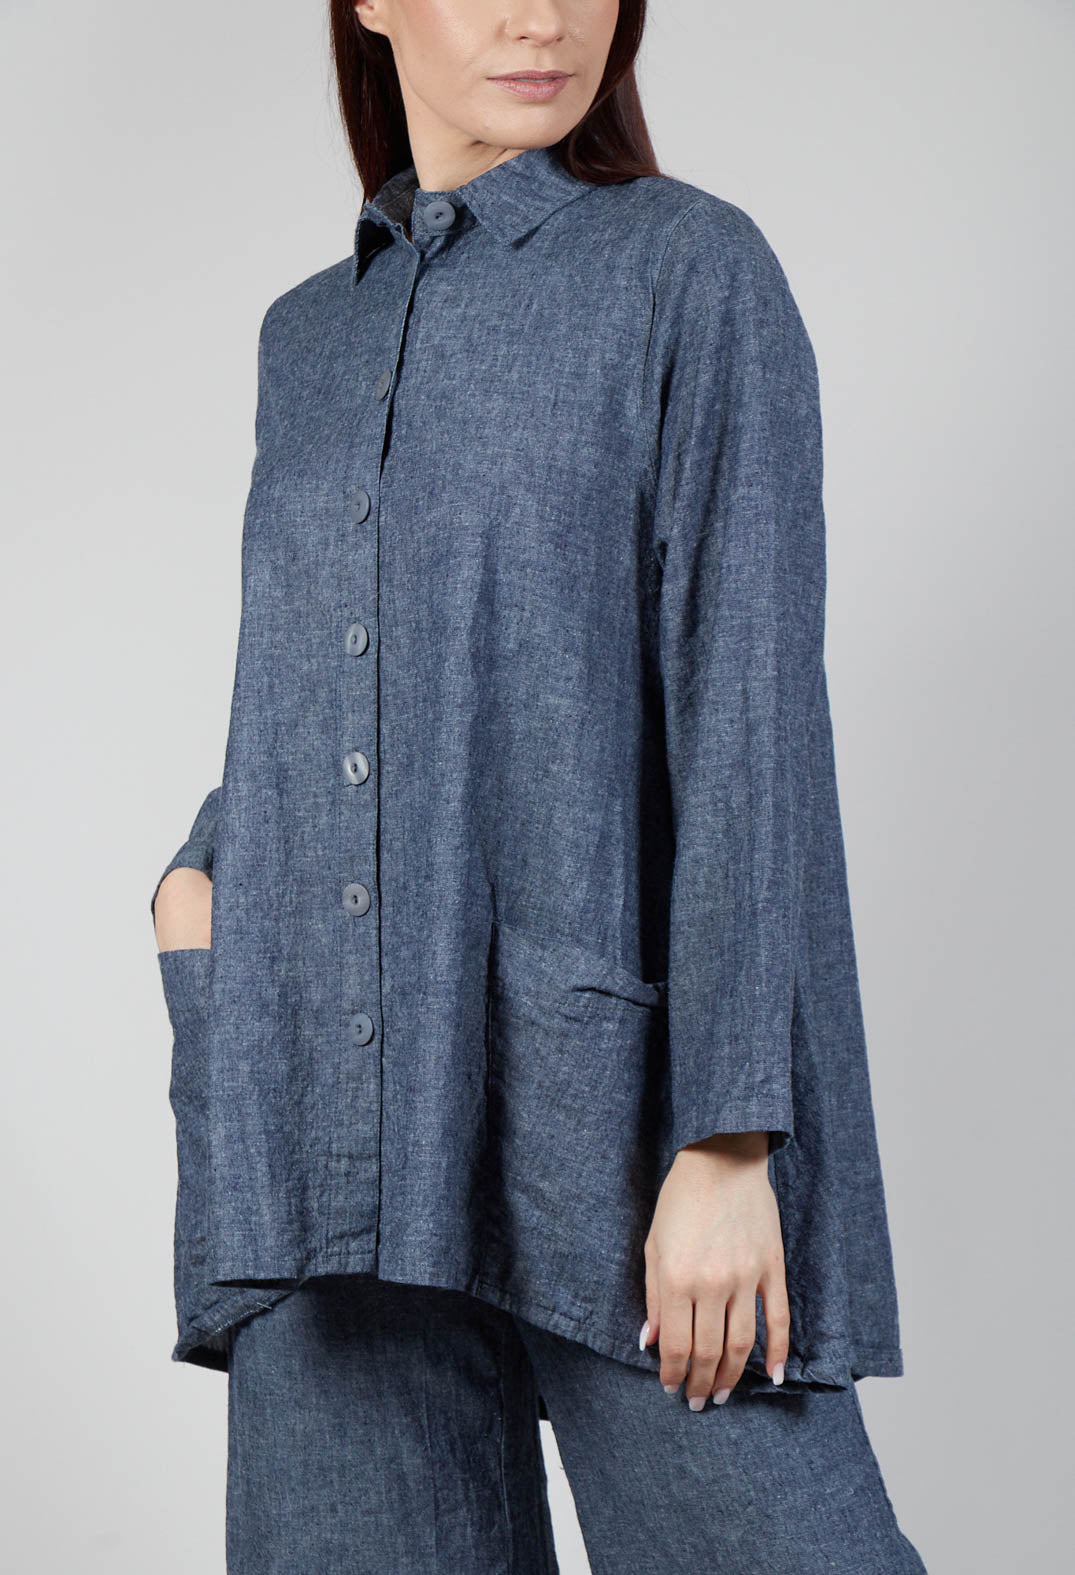 Long Sleeve Button Up Jacket in Blue Denim